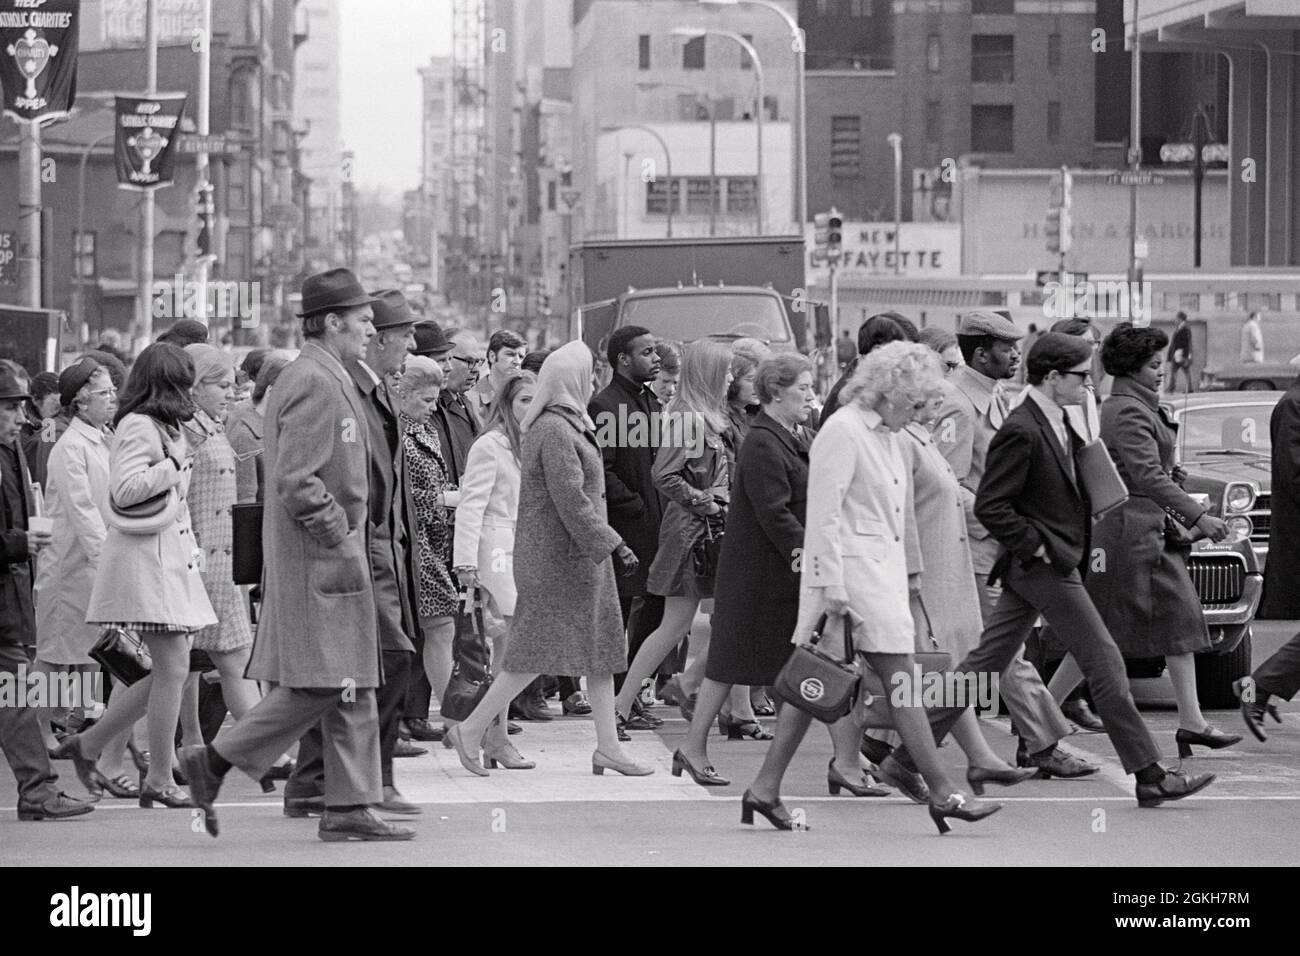 1970s BUSY CROWDED PEDESTRIANS CROSSING CITY STREET WEARING COATS AND JACKETS ALL WALKING IN SAME DIRECTION PHILADELPHIA PA USA - c11225 HAR001 HARS MALES PEDESTRIANS B&W MORNING NORTH AMERICA NORTH AMERICAN SAME WIDE ANGLE COMMUTERS INTERSECTION AFRICAN-AMERICANS AFRICAN-AMERICAN AND PA BLACK ETHNICITY DIRECTION END OF DAY CITIES GOING HOME CROSS WALK BLACK AND WHITE CAUCASIAN ETHNICITY COMMUTER CROSSWALK HAR001 OLD FASHIONED AFRICAN AMERICANS Stock Photo